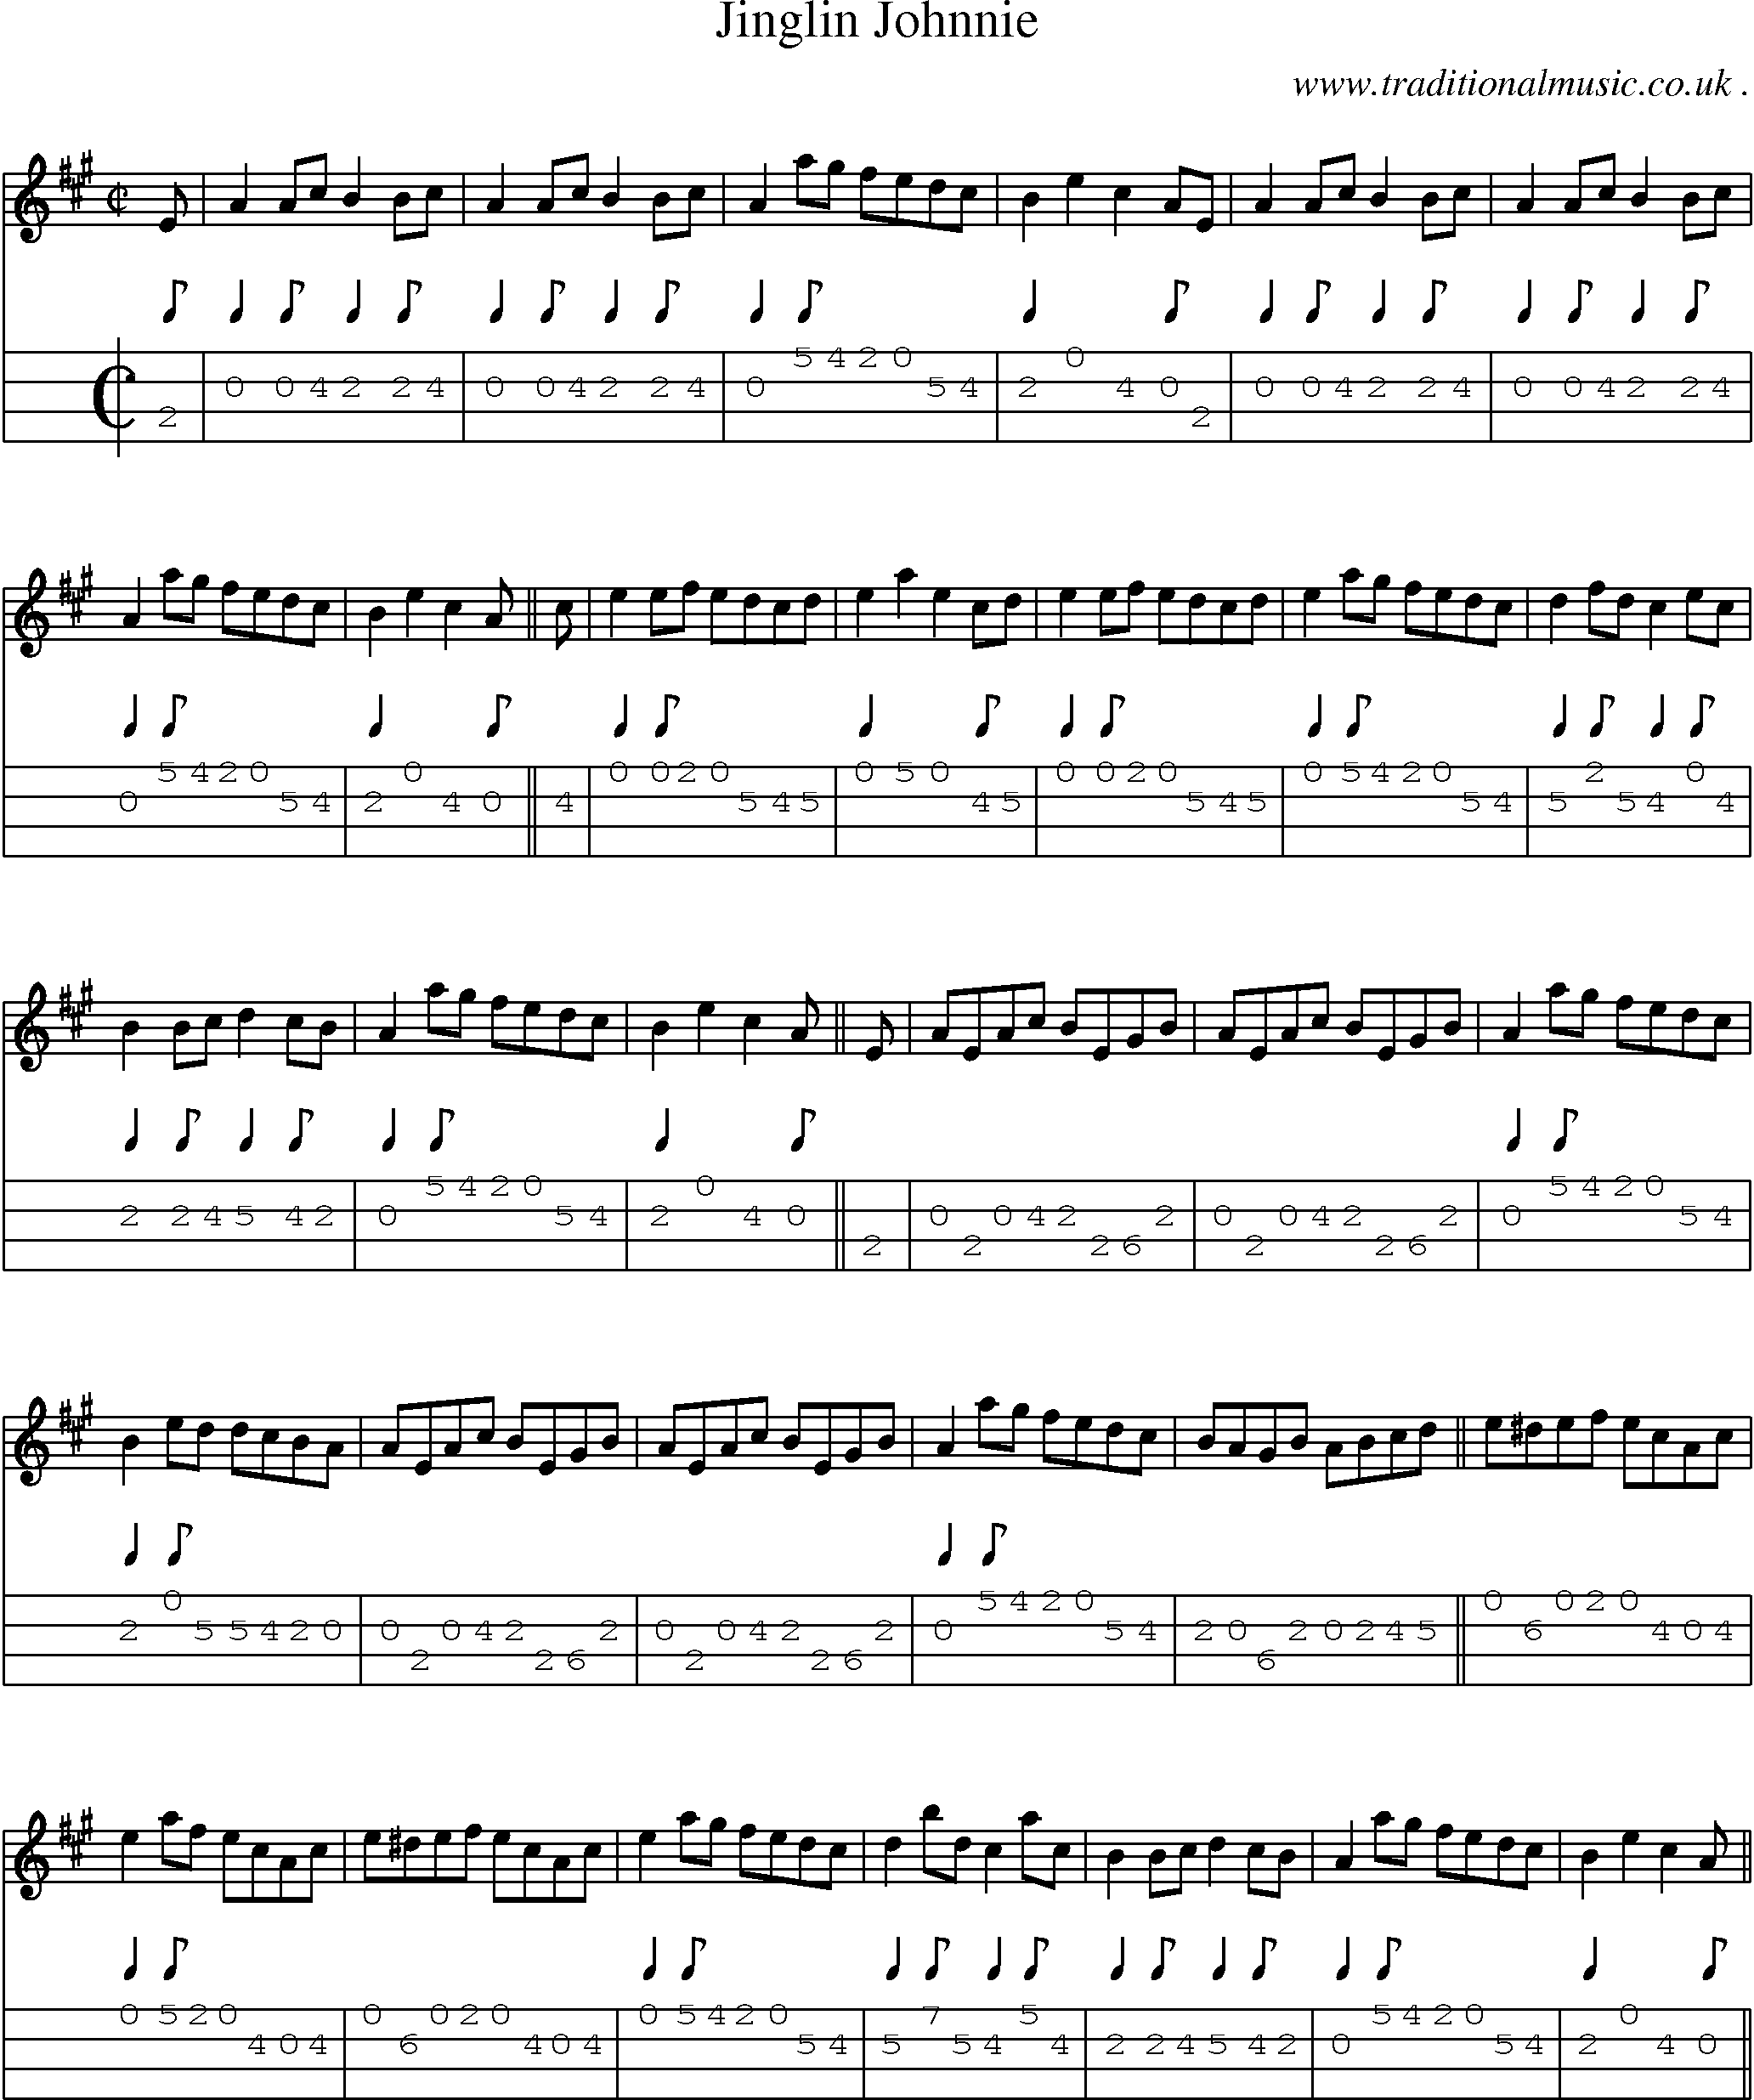 Sheet-music  score, Chords and Mandolin Tabs for Jinglin Johnnie